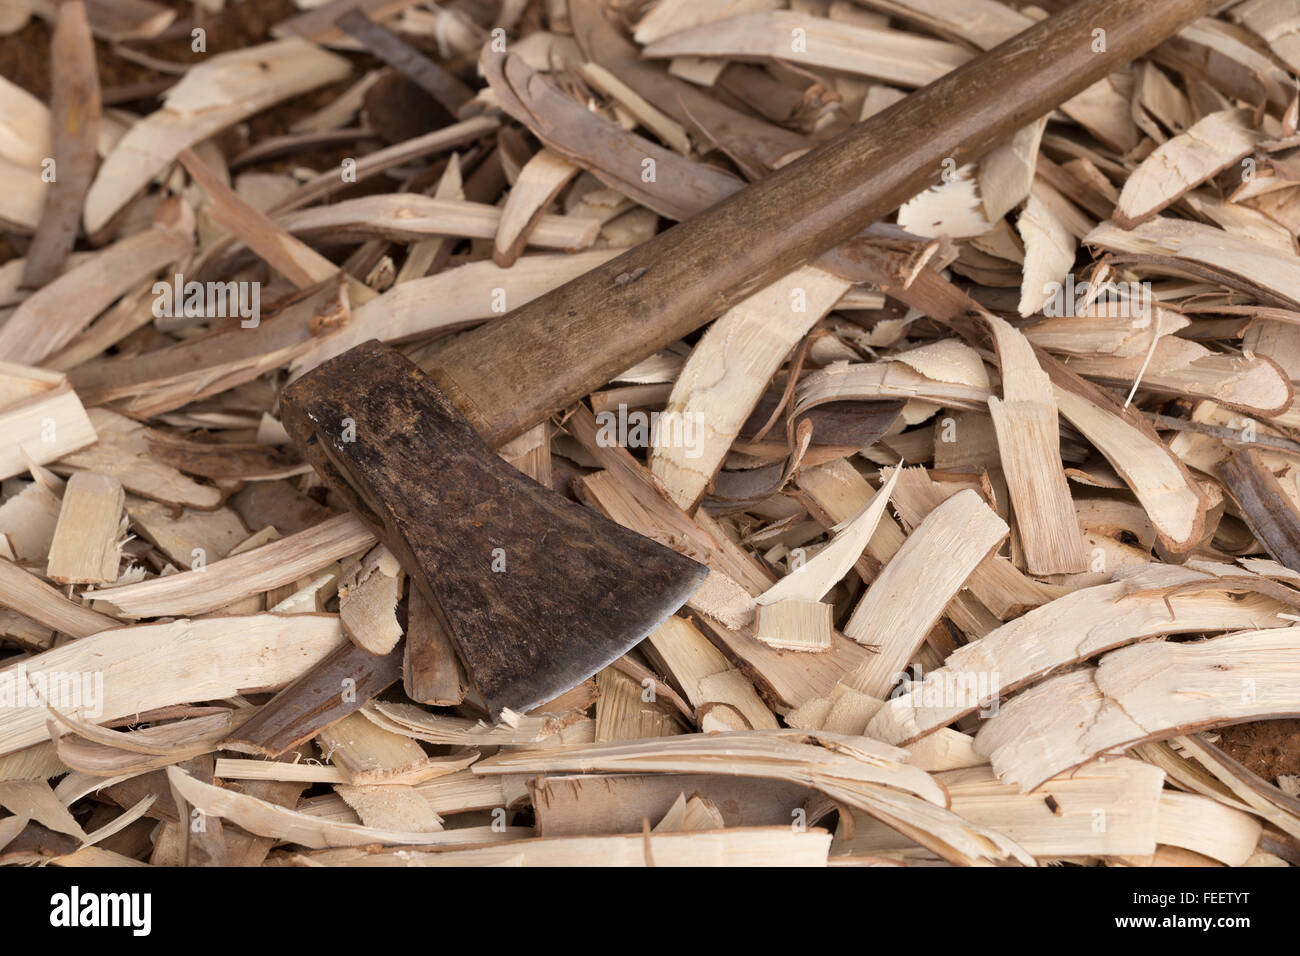 Old heavy axe tool with wood scrap Stock Photo